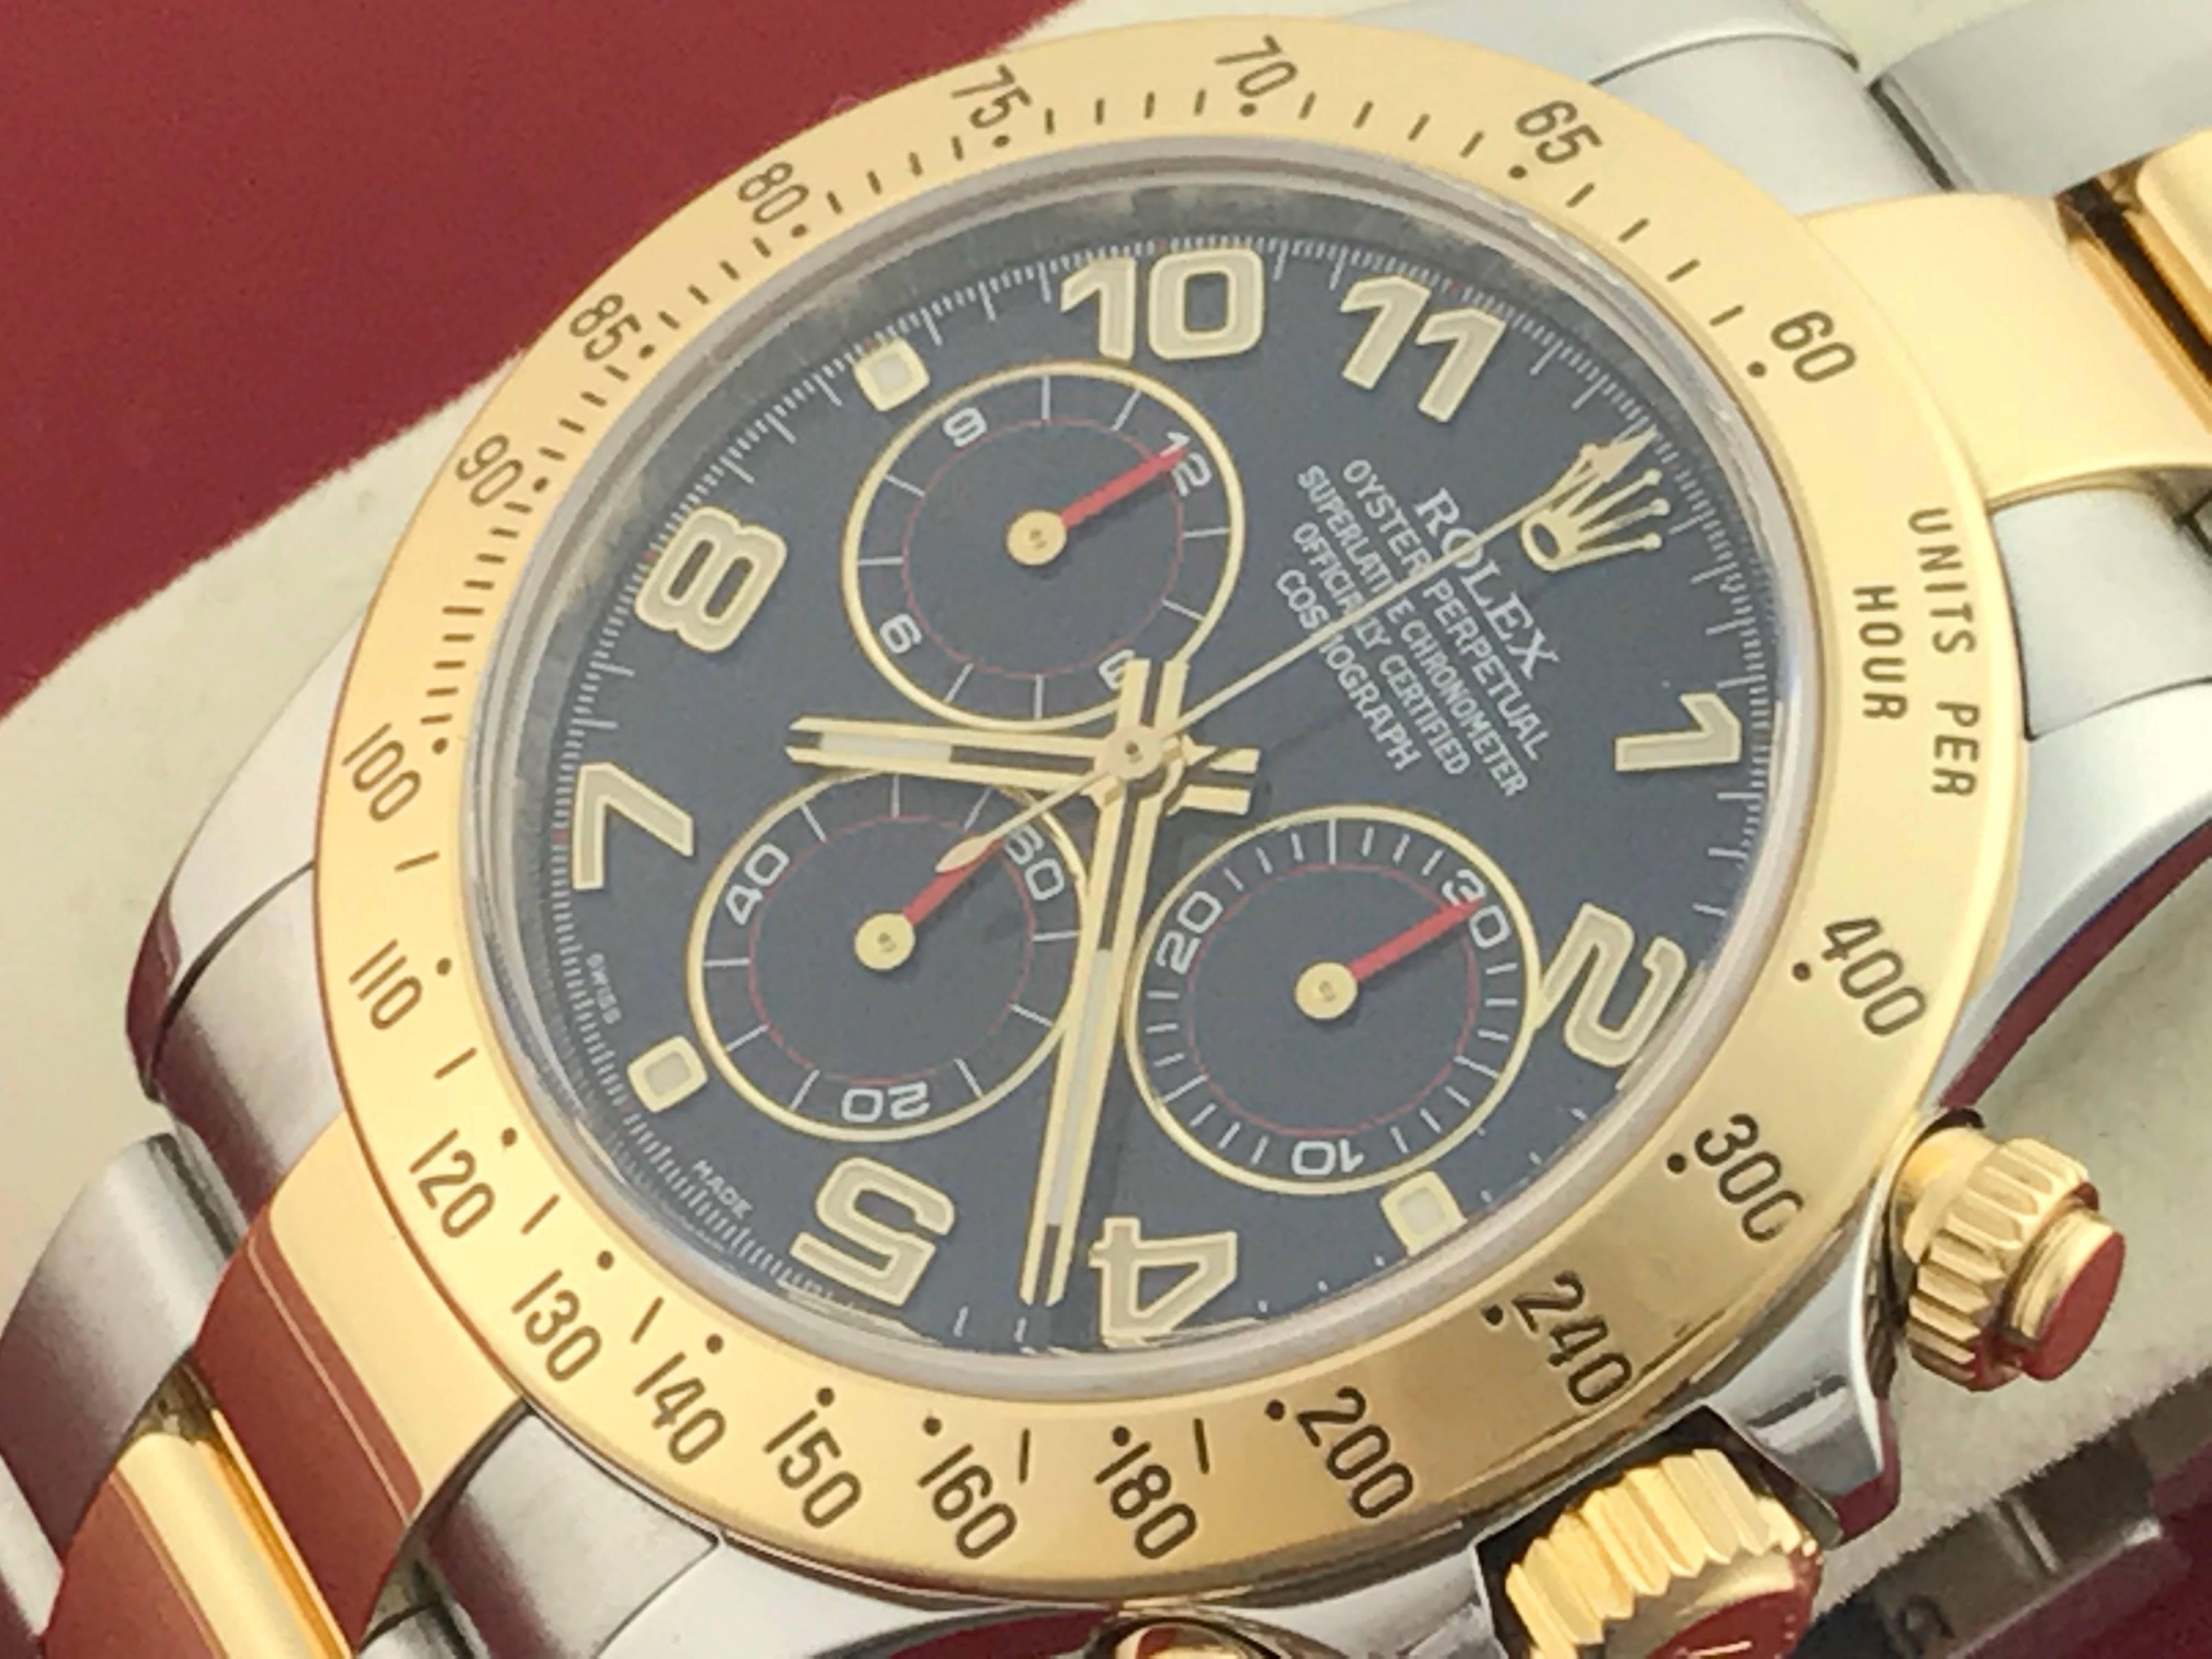 Rolex Men's Daytona Model 116523 at a great price.  Automatic Winding Oyster Perpetual Cosmograph, Blue dial with luminous Arabic numerals.  Stainless steel case with 18k yellow gold bezel, Stainless Steel and 18k Yellow Gold Oyster bracelet with